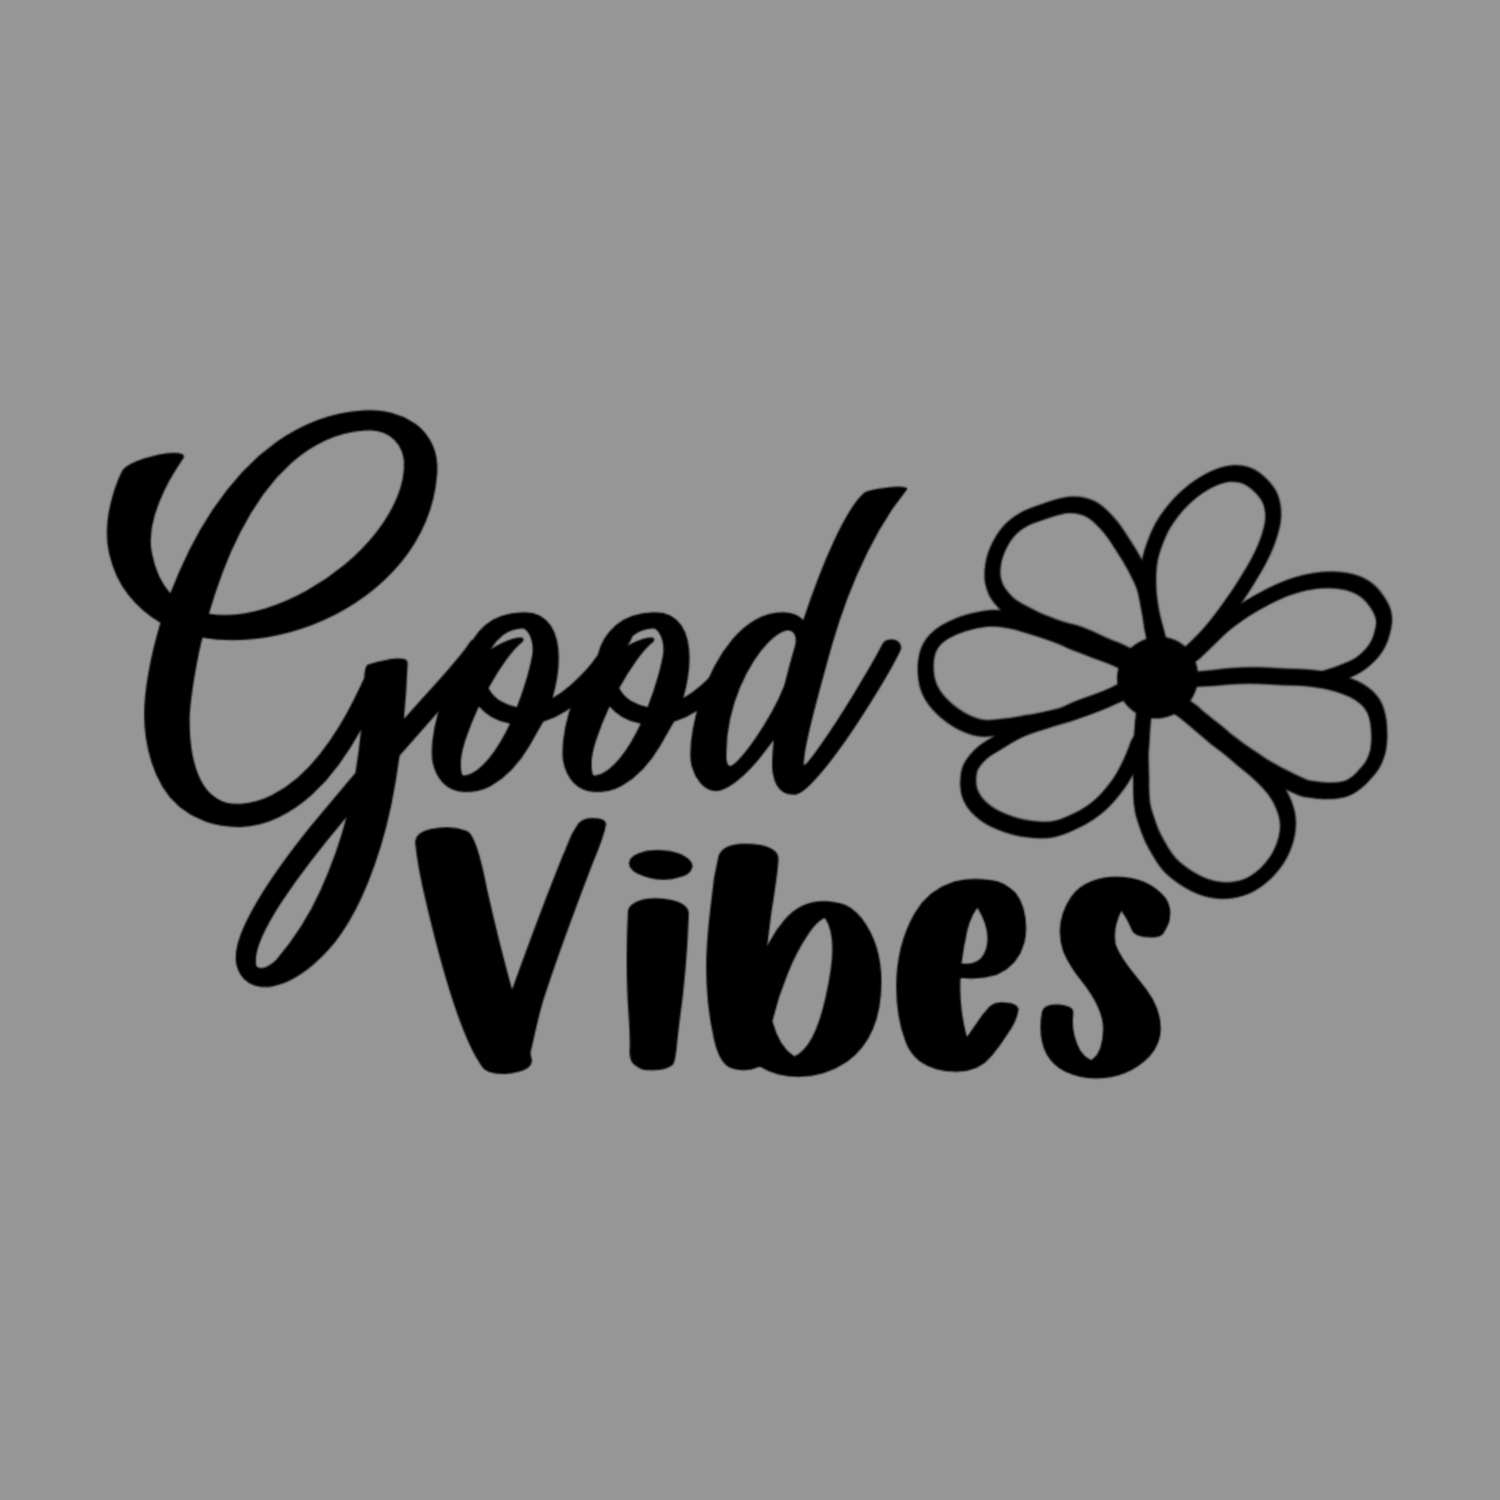 Meaningful Tattoos Ideas - Good Vibes, Great Life - New tattoo -  TattooViral.com | Your Number One source for daily Tattoo designs, Ideas &  Inspiration